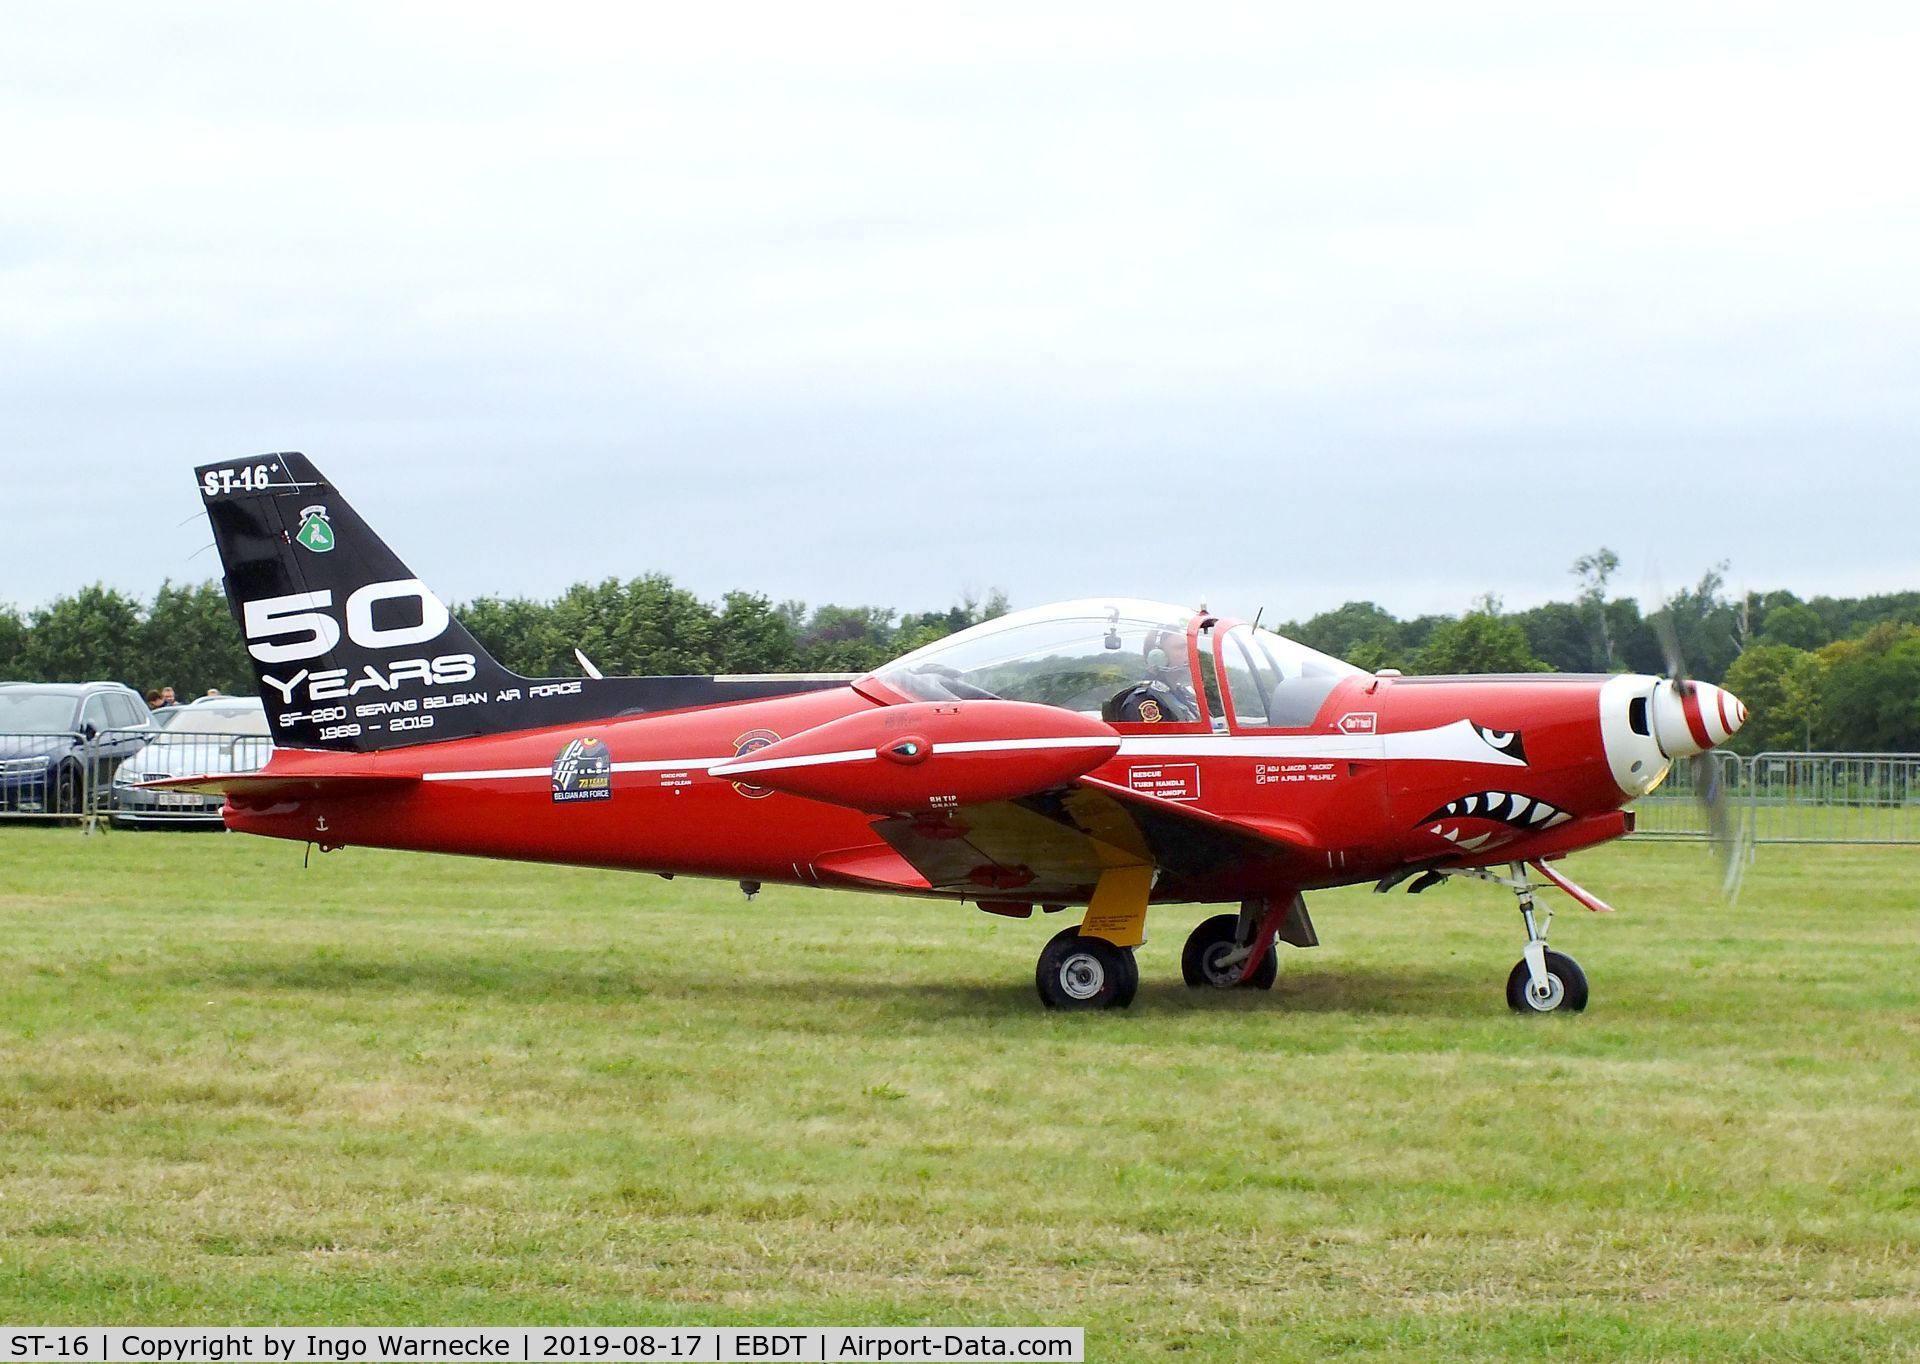 ST-16, SIAI-Marchetti SF-260M+ C/N 10-16, SIAI-Marchetti SF.260M+ of the 'Diables Rouges / Red Devils' Belgian Air Force Aerobatic Team at the 2019 Fly-in at Diest/Schaffen airfield